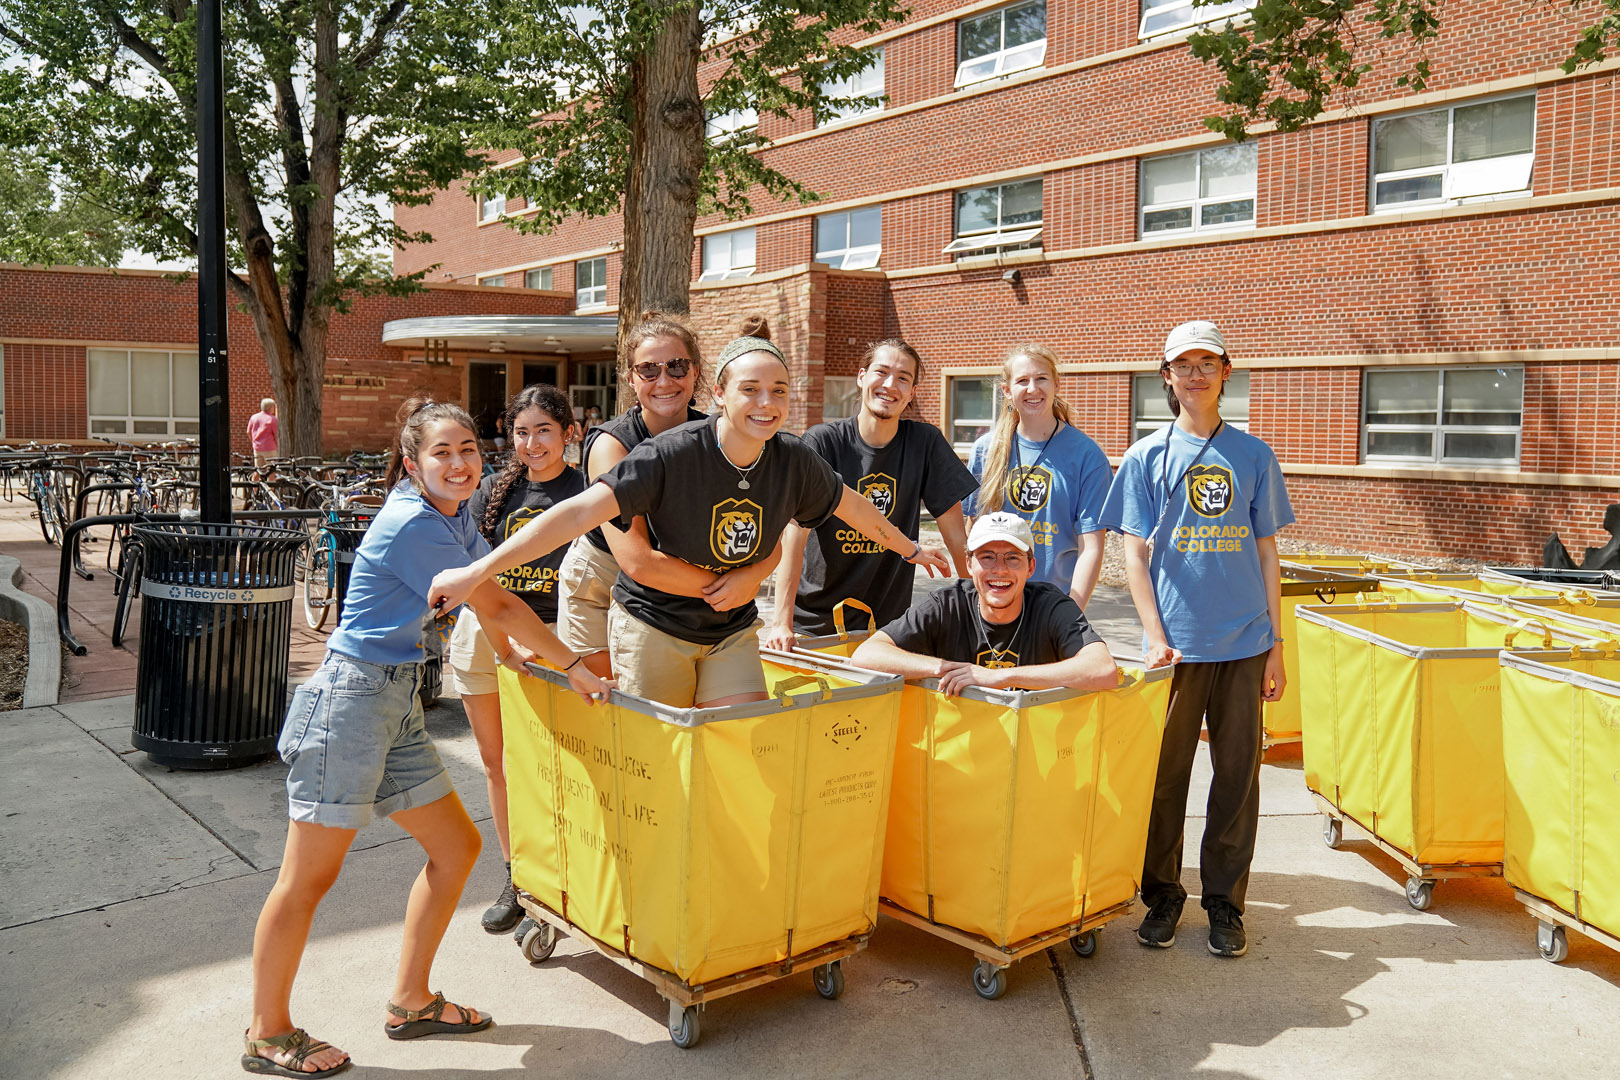 Current students and RAs welcome new students and help with move-in. Photo by Gray Warrior